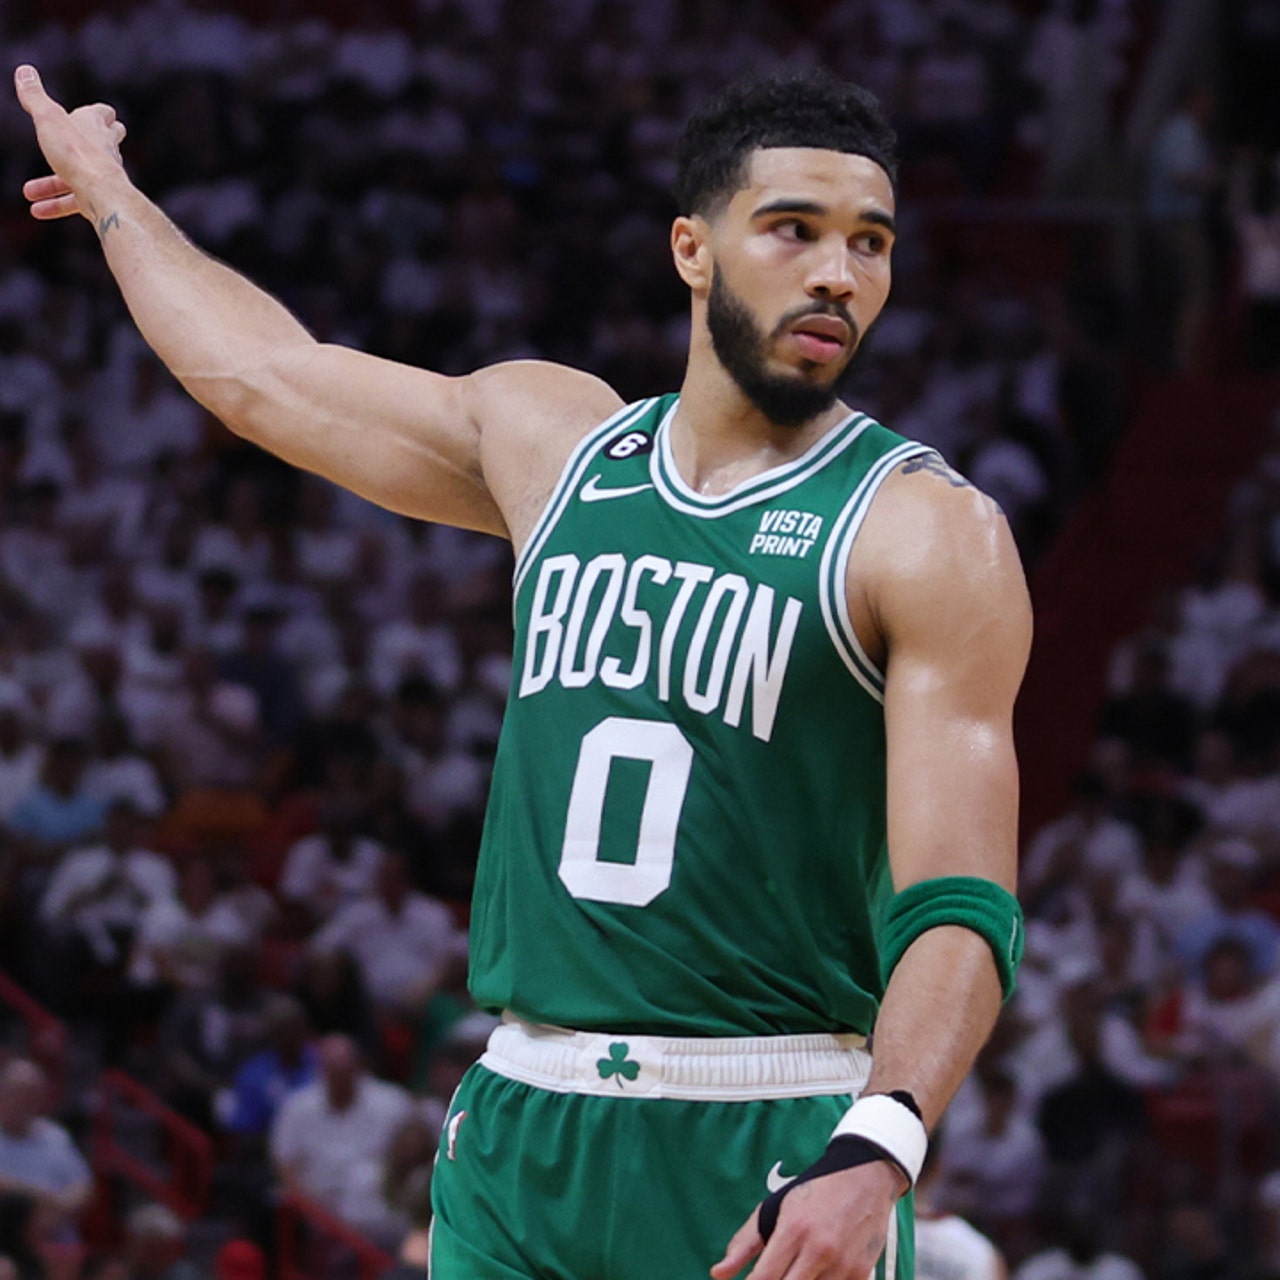 Cardinals to give Celtics star Jayson Tatum awesome St. Louis